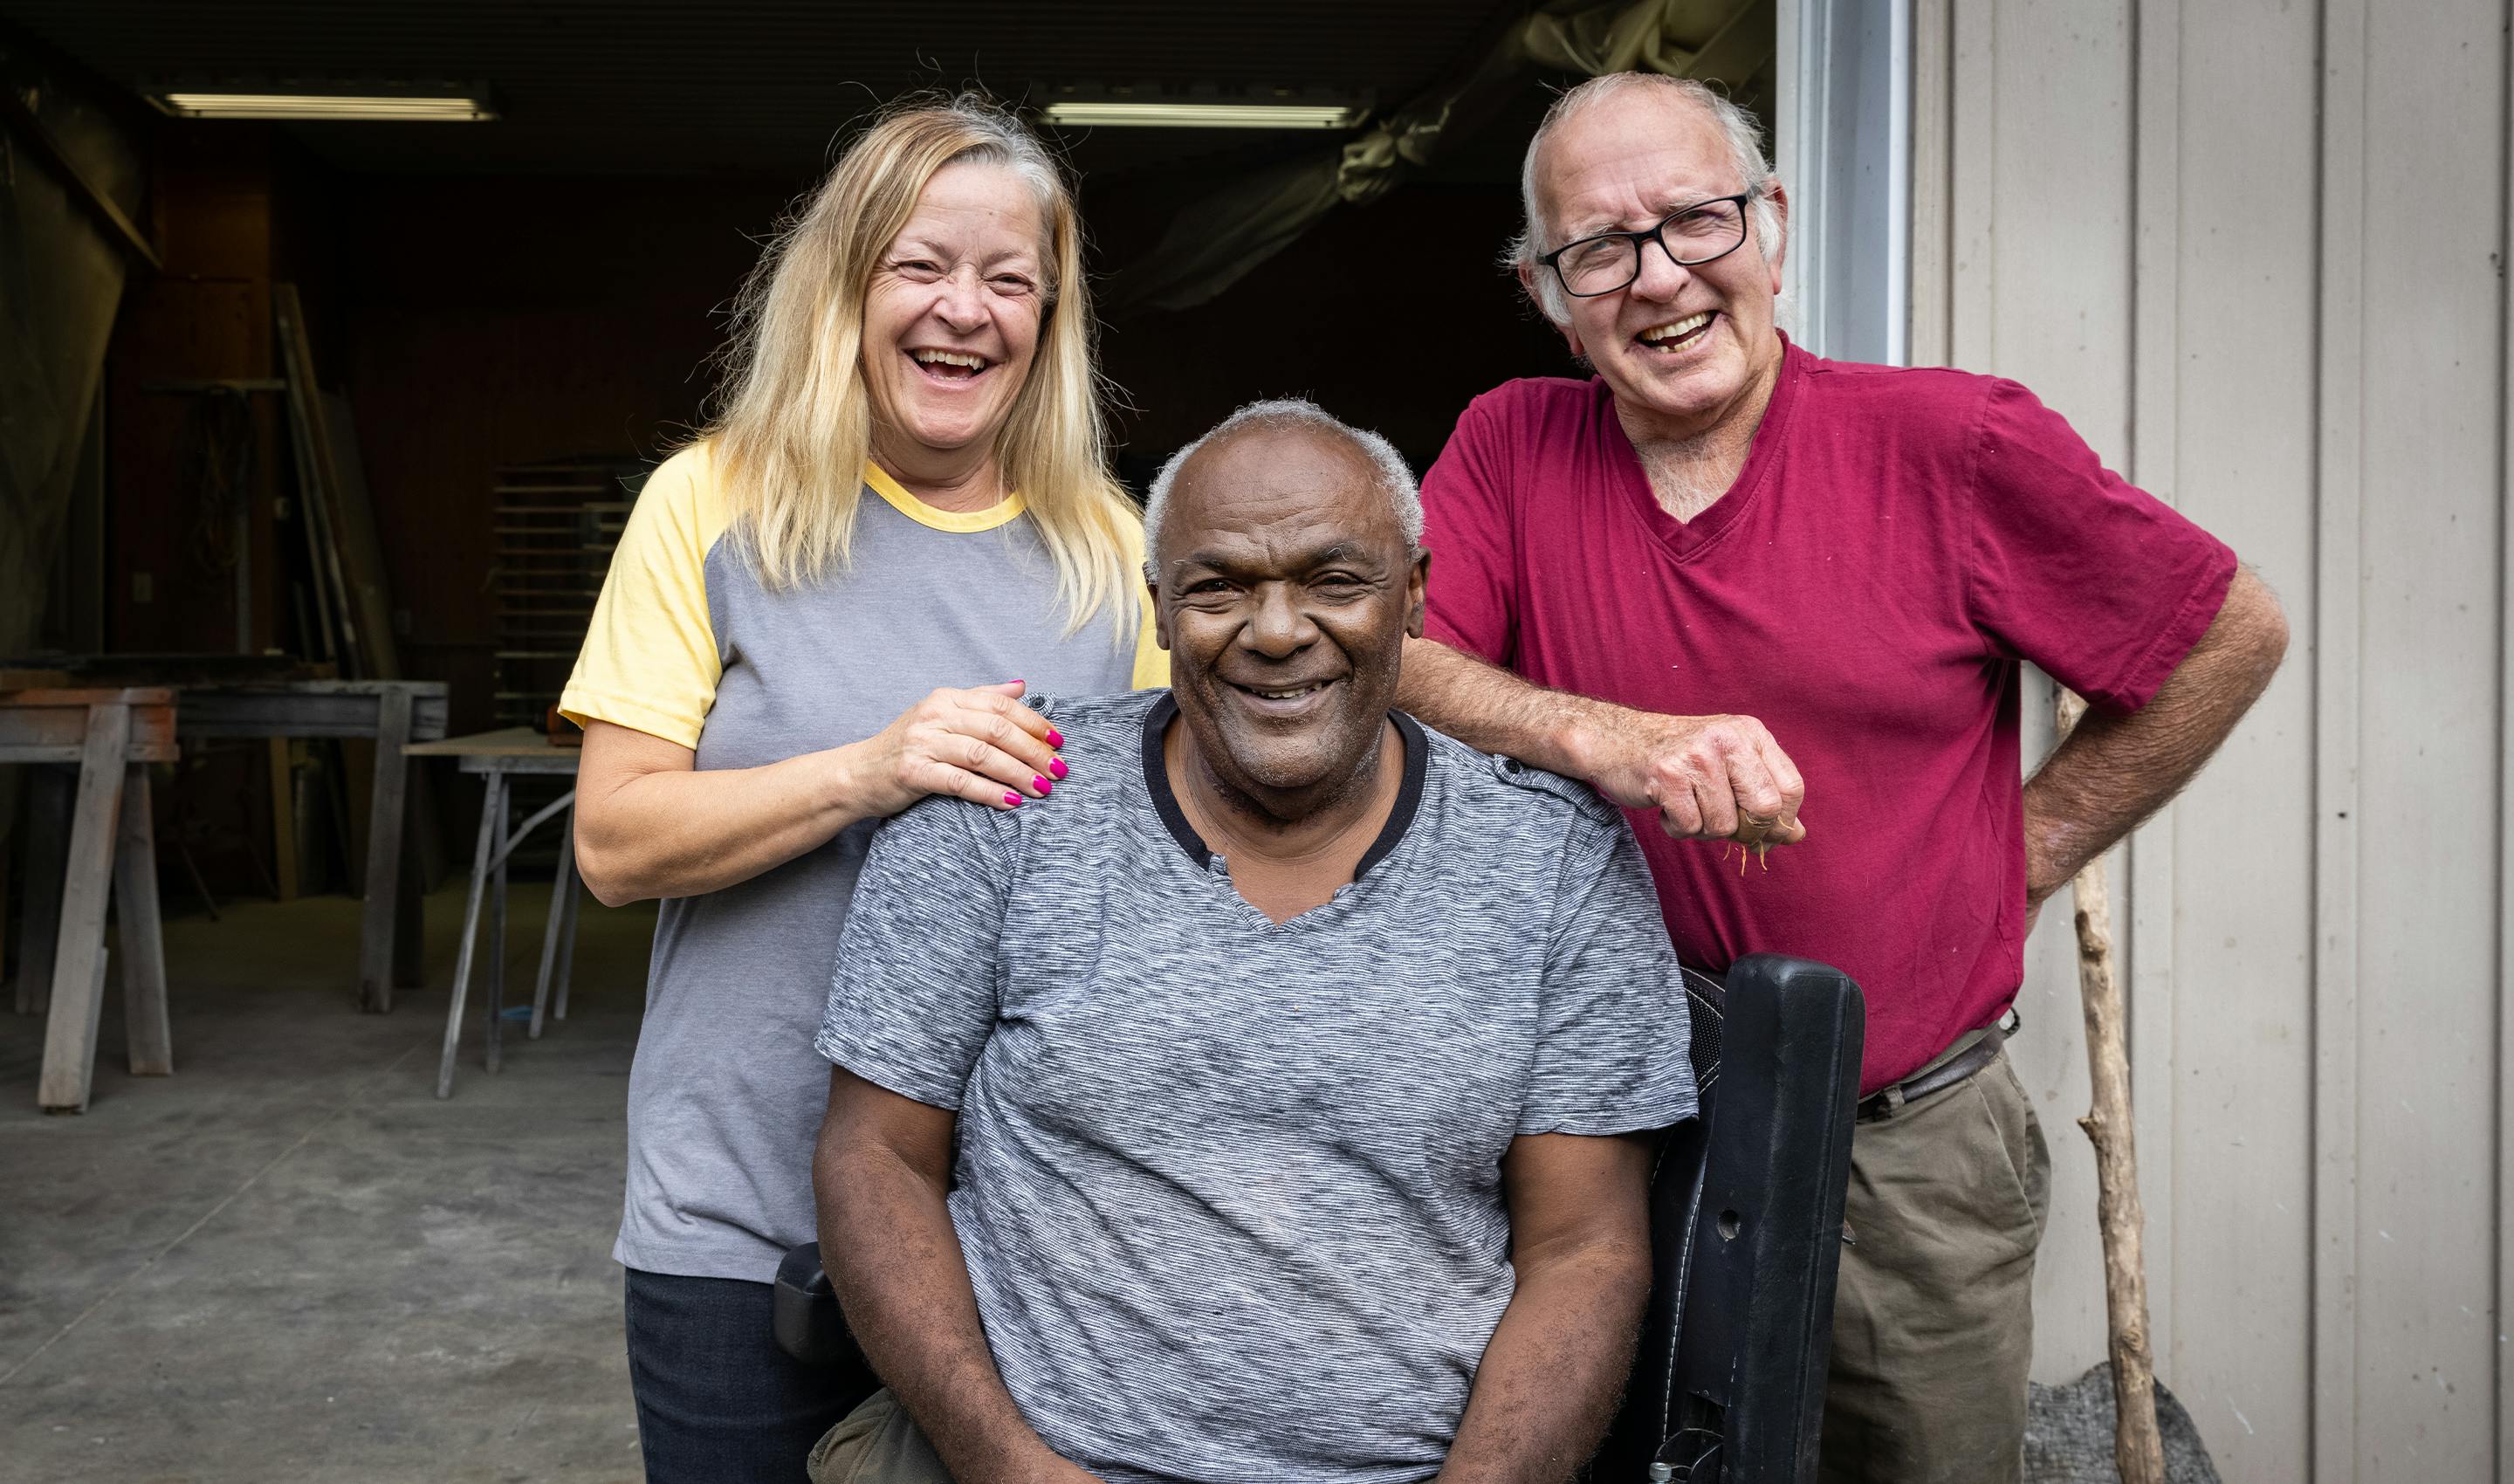 An older African man seated in a wheelchair smiling at the camera flanked by two friends standing behind him.